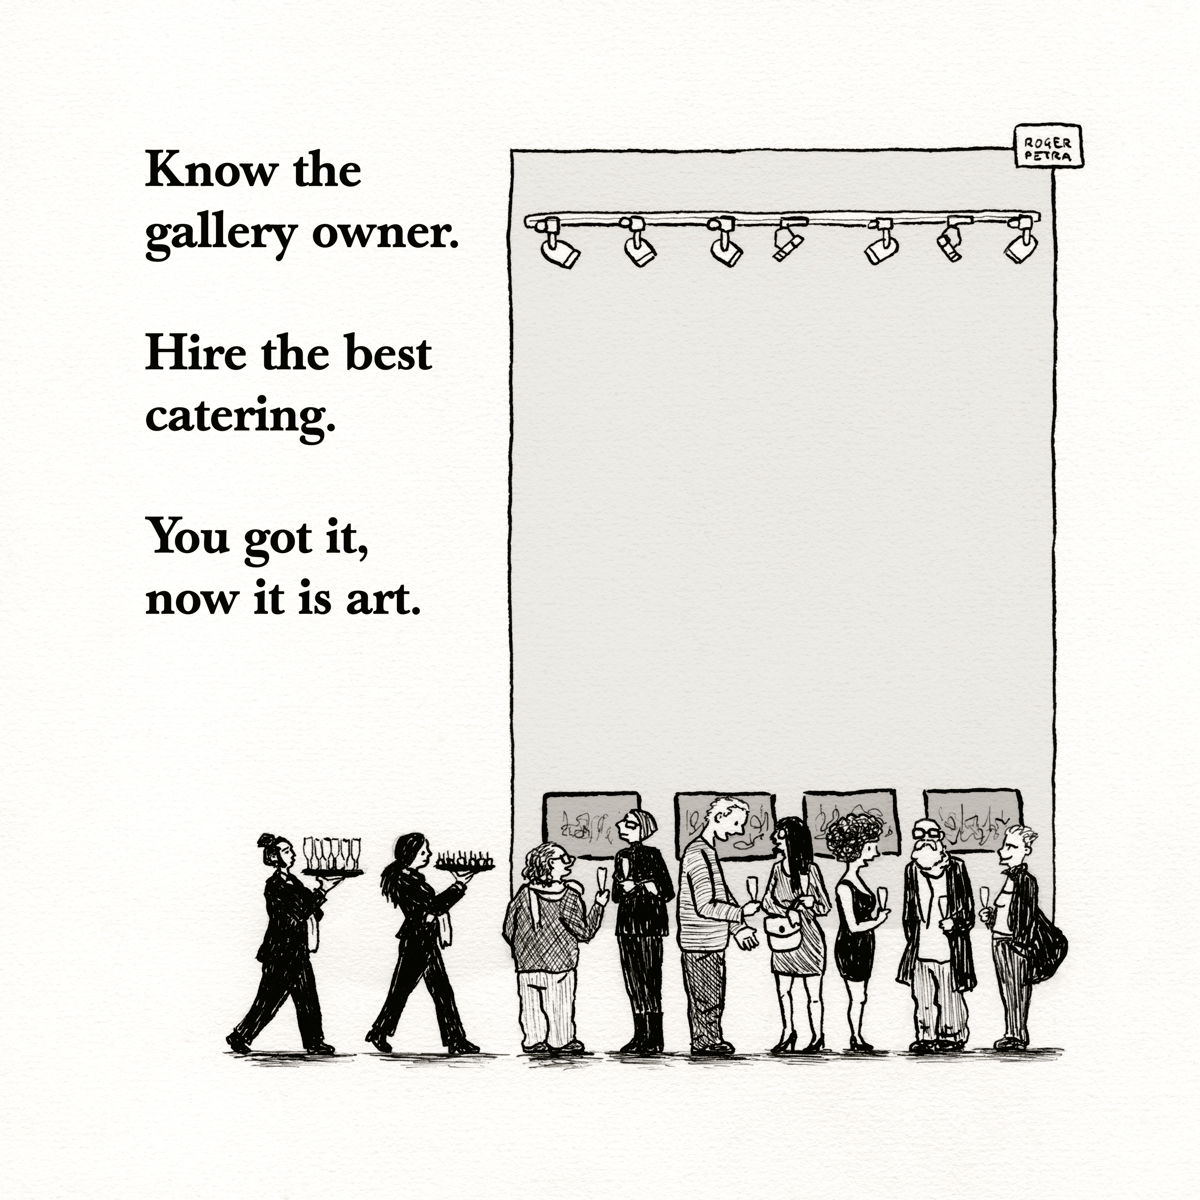 Know the gallery owner. Hire the best catering. Now you got it, it is art.